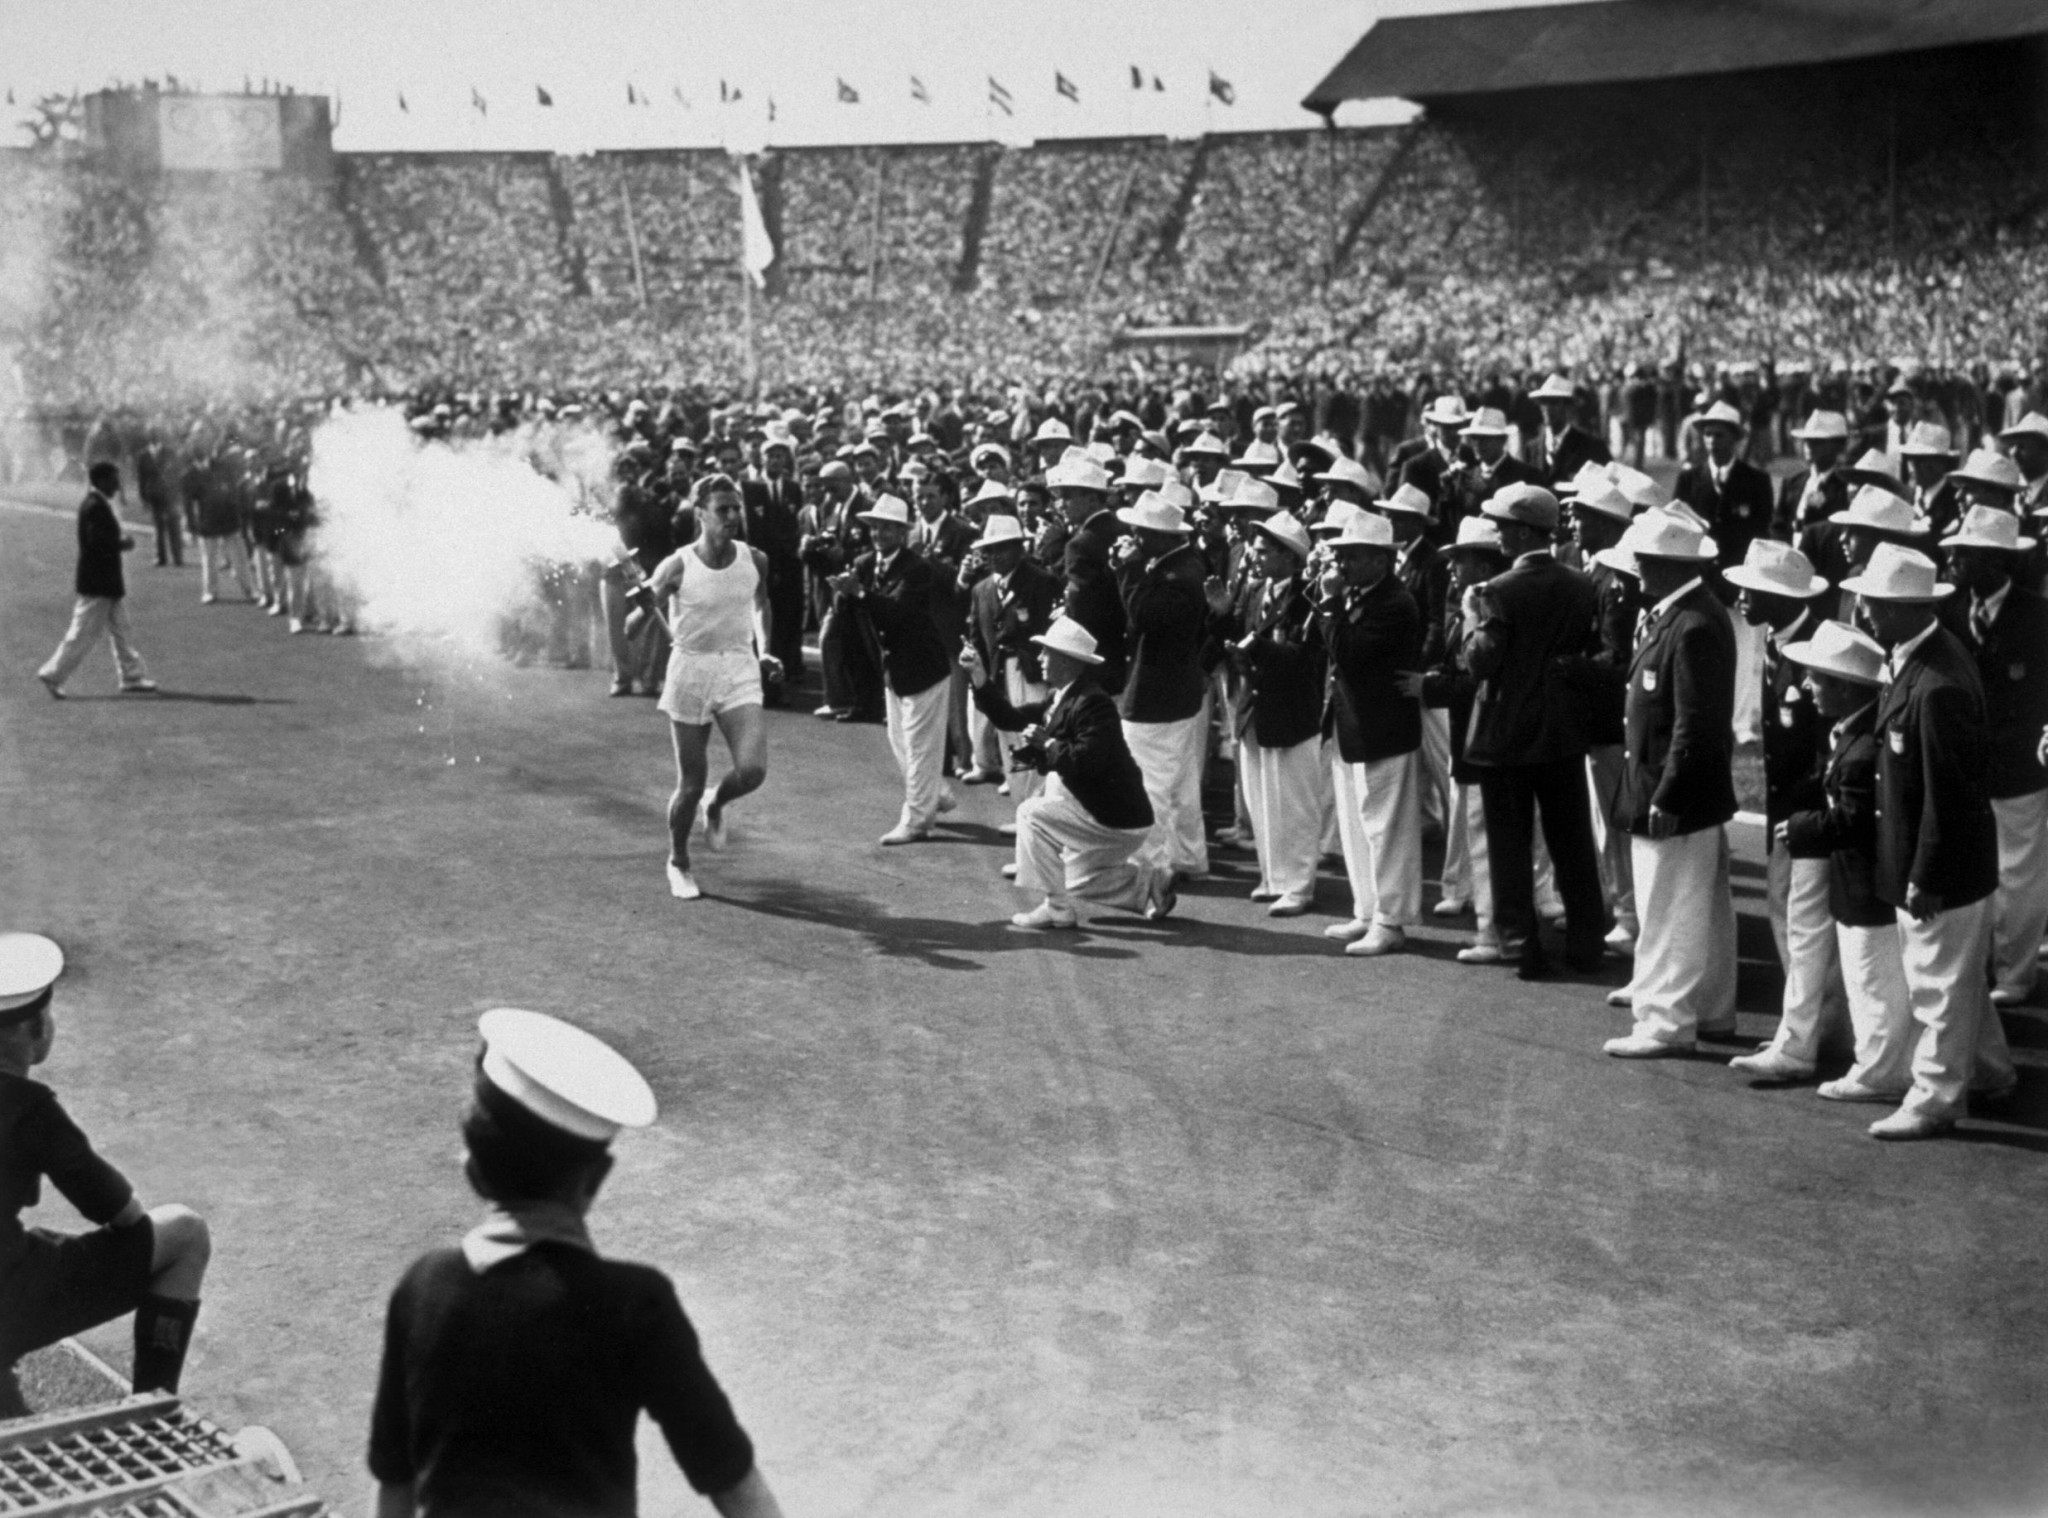 In 1948, the Olympic Hymn was played one minute after the Olympic cauldron had been ignited by athlete John Mark ©Getty Images